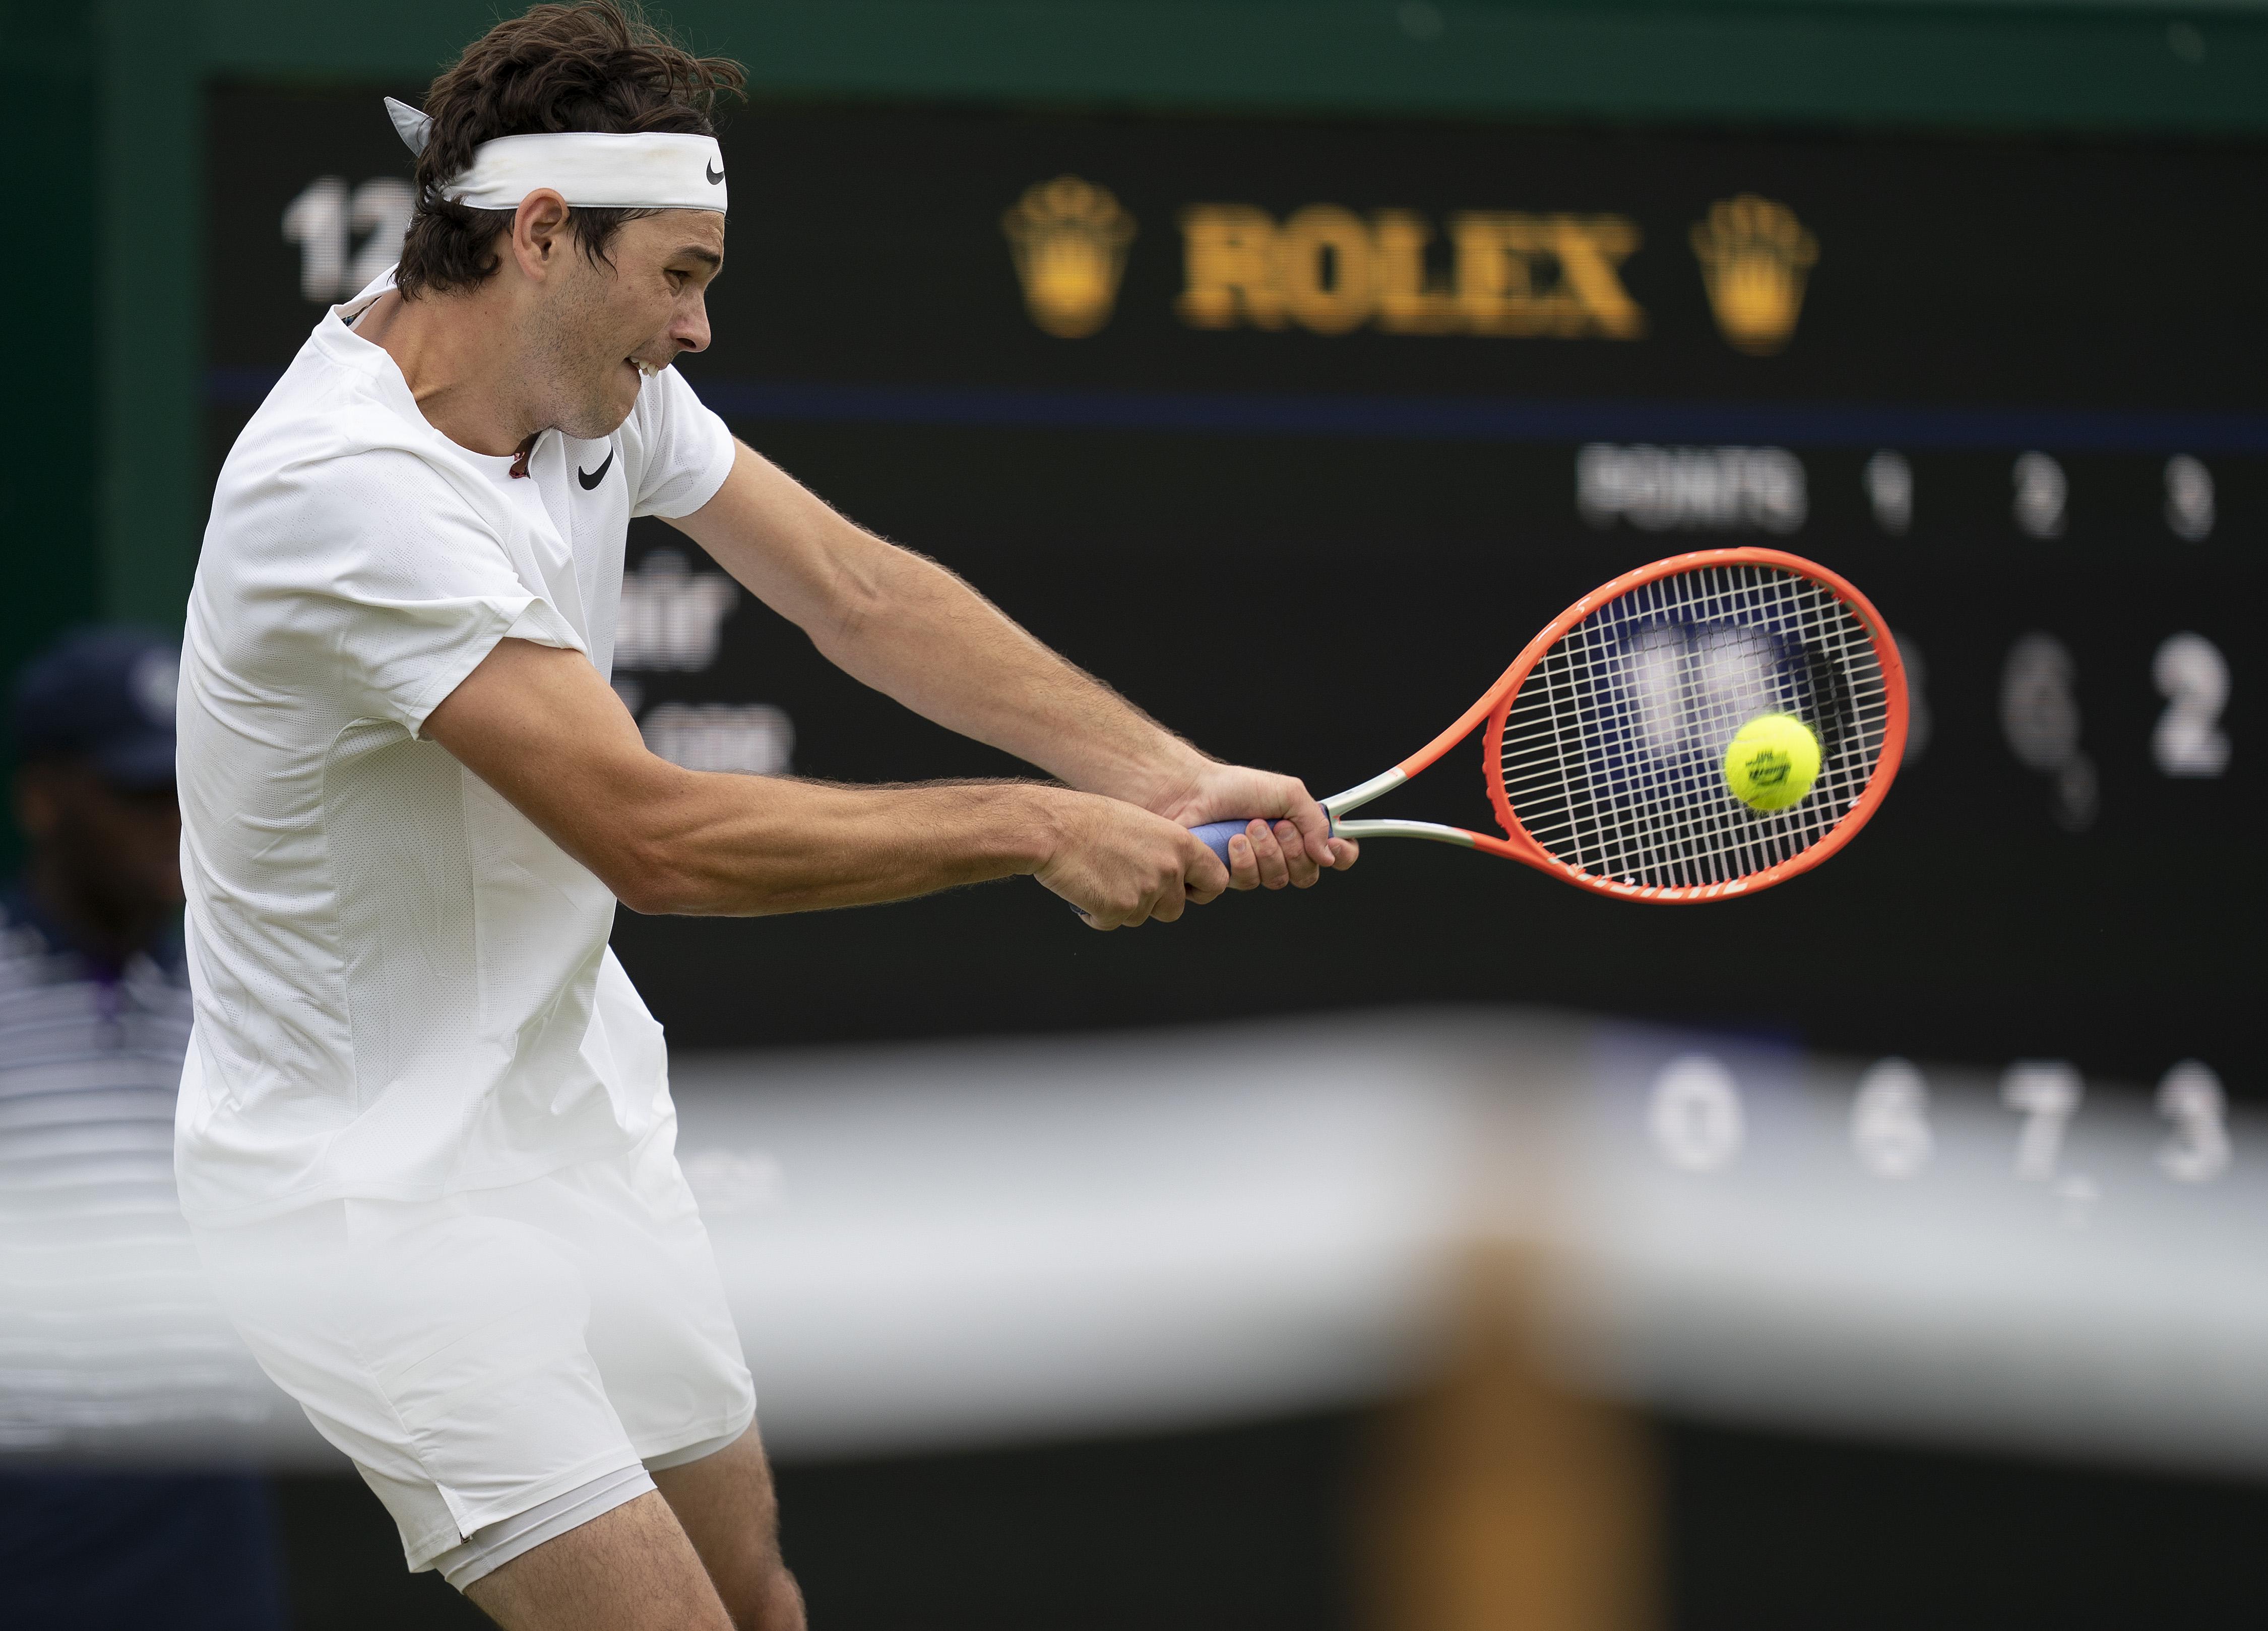 Jason Kubler vs Taylor Fritz Odds, Prediction and Betting Trends for 2022 Wimbledon Men's Round of 16 Match